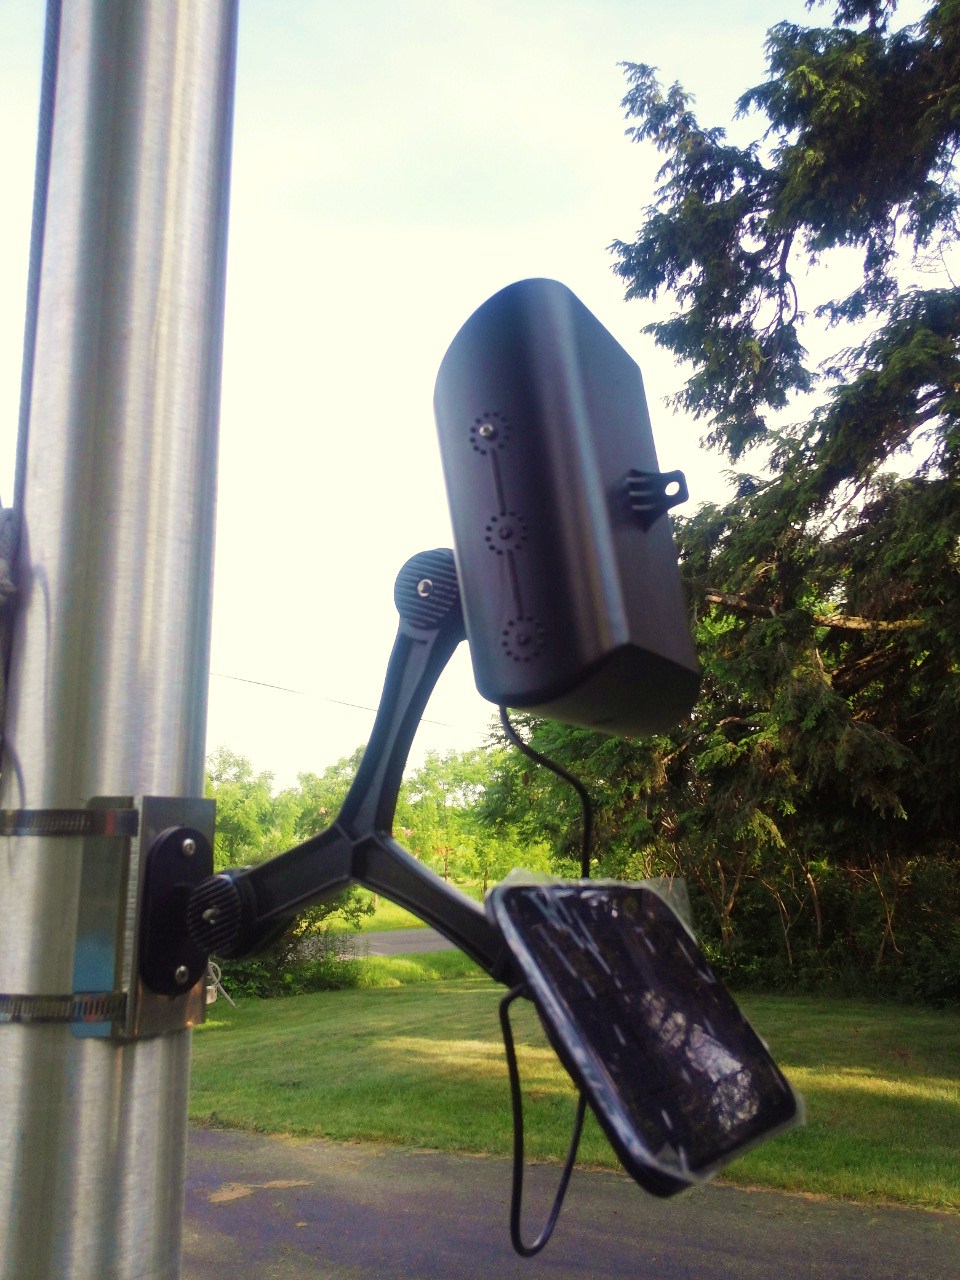 Entry Level Commercial Solar Flagpole Light in use- PolePalUSA